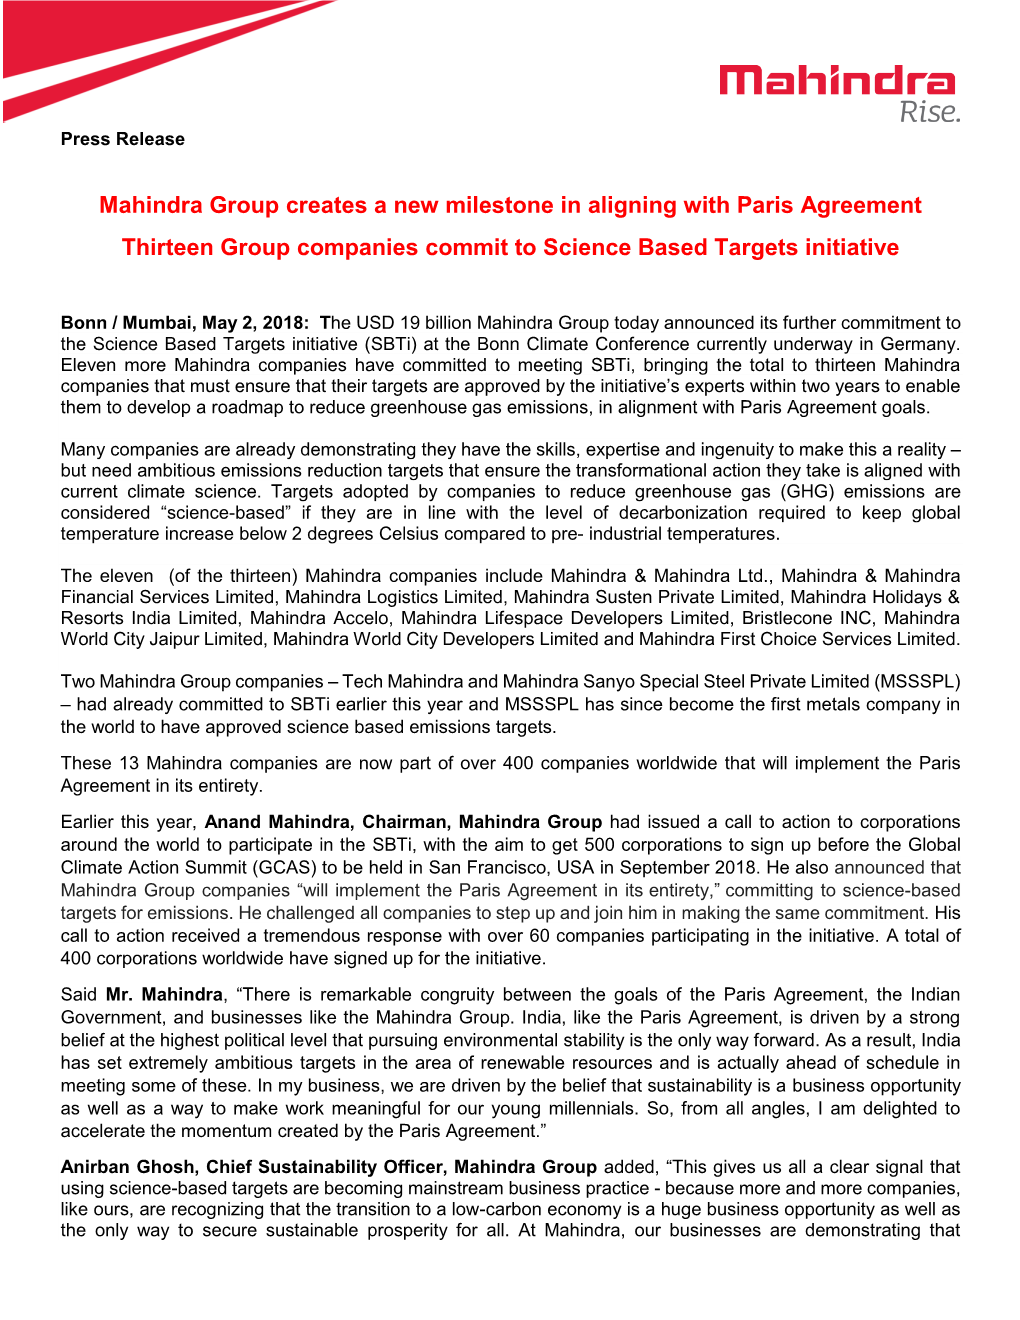 Mahindra Group Creates a New Milestone in Aligning with Paris Agreement Thirteen Group Companies Commit to Science Based Targets Initiative